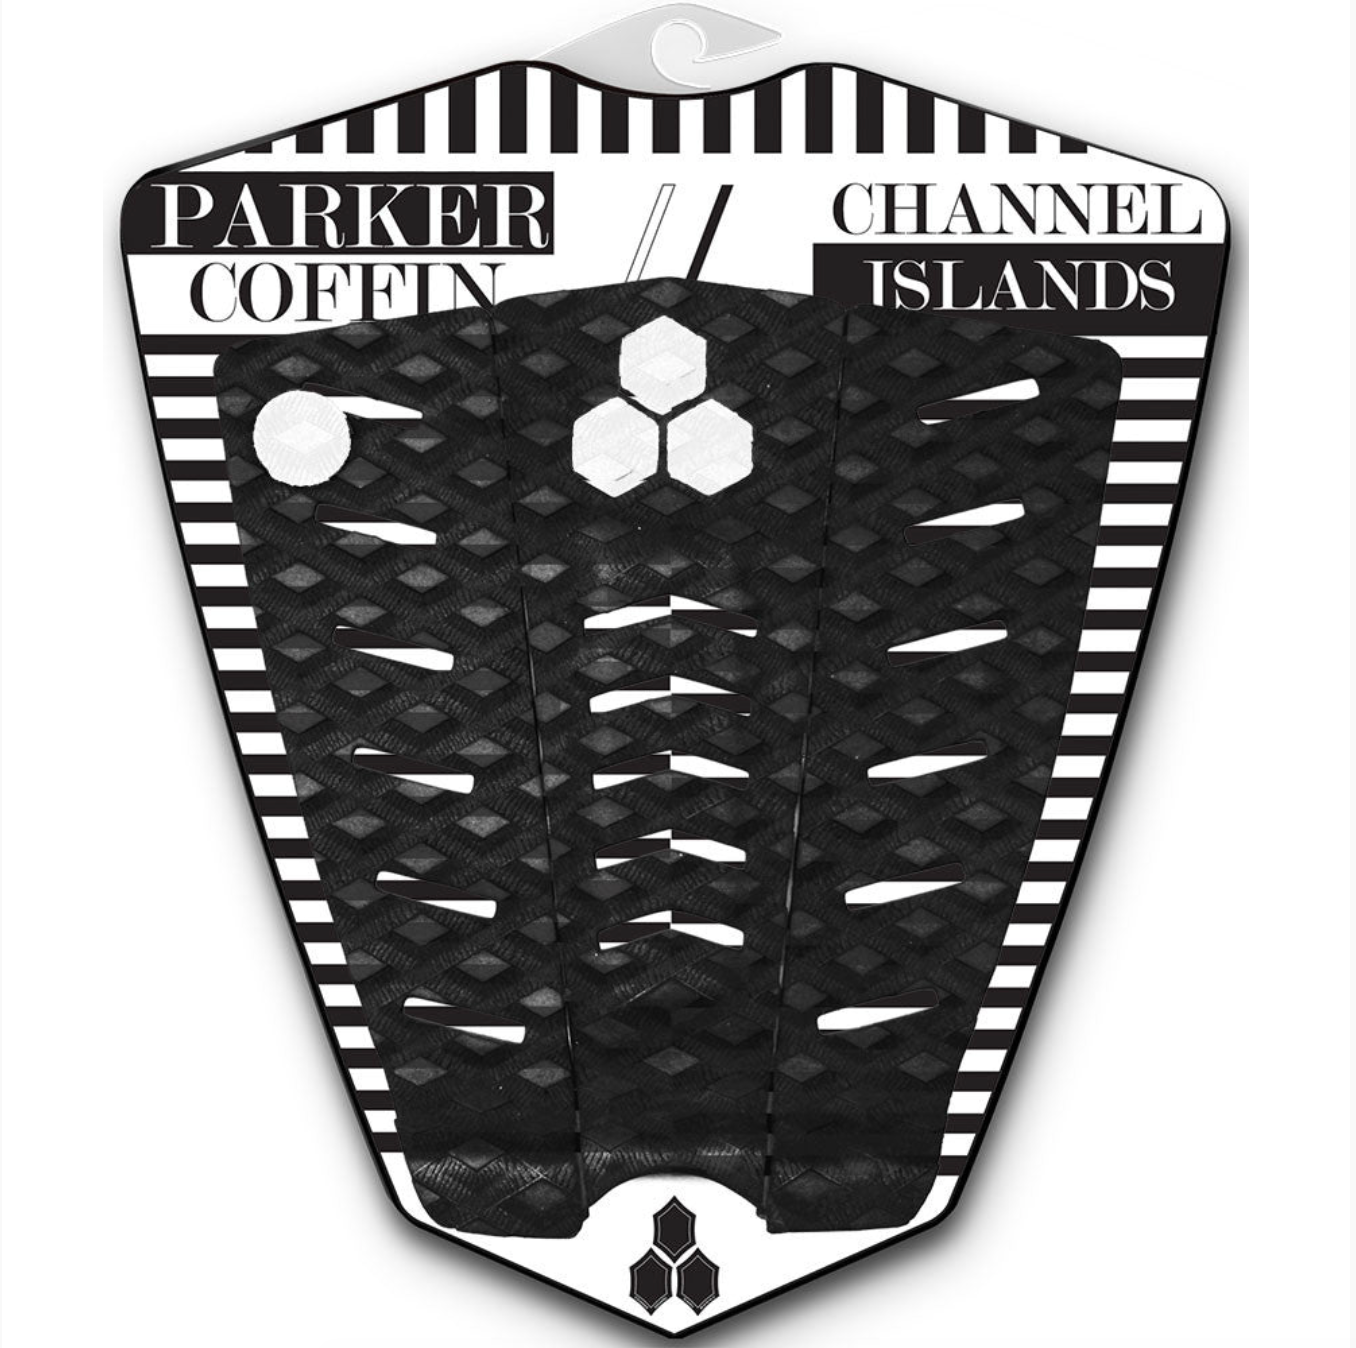 CHANNEL ISLANDS   PARKER COFFIN SIGNATURE TRACTION PAD